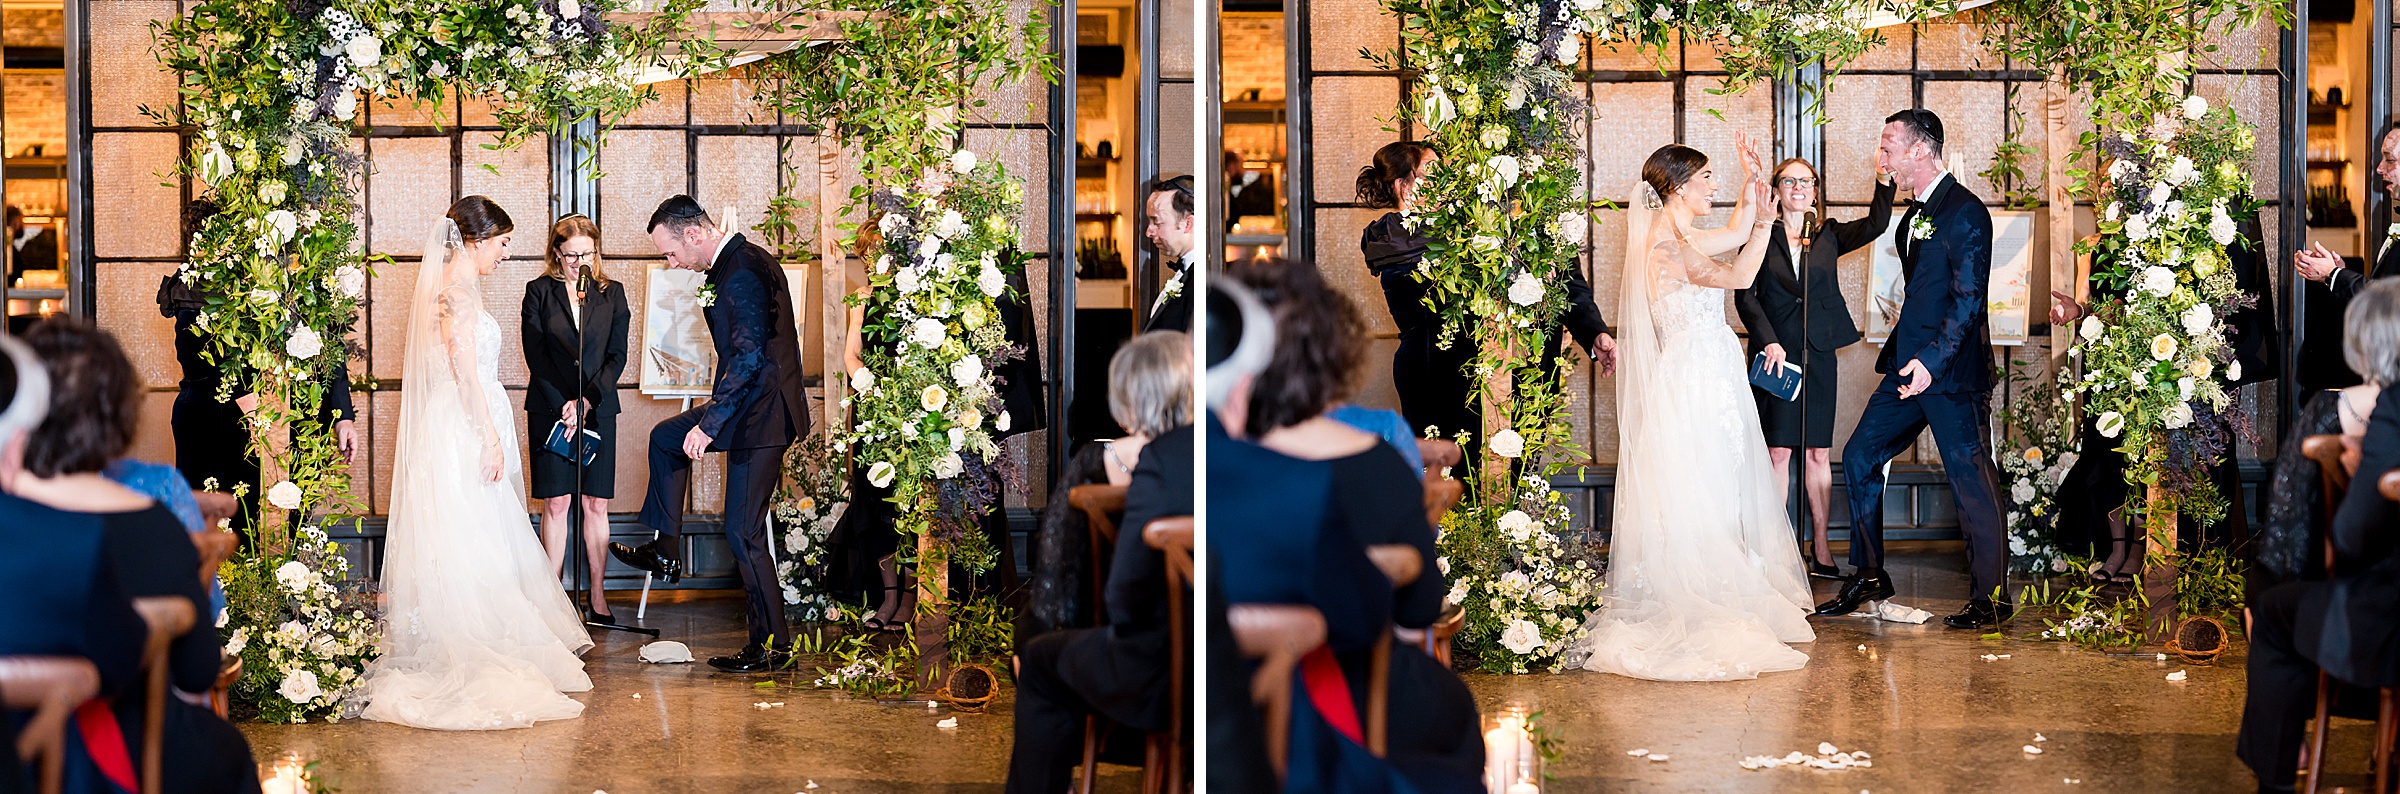 A bride and groom kissing in front of a mirror at their Lilah Events wedding.